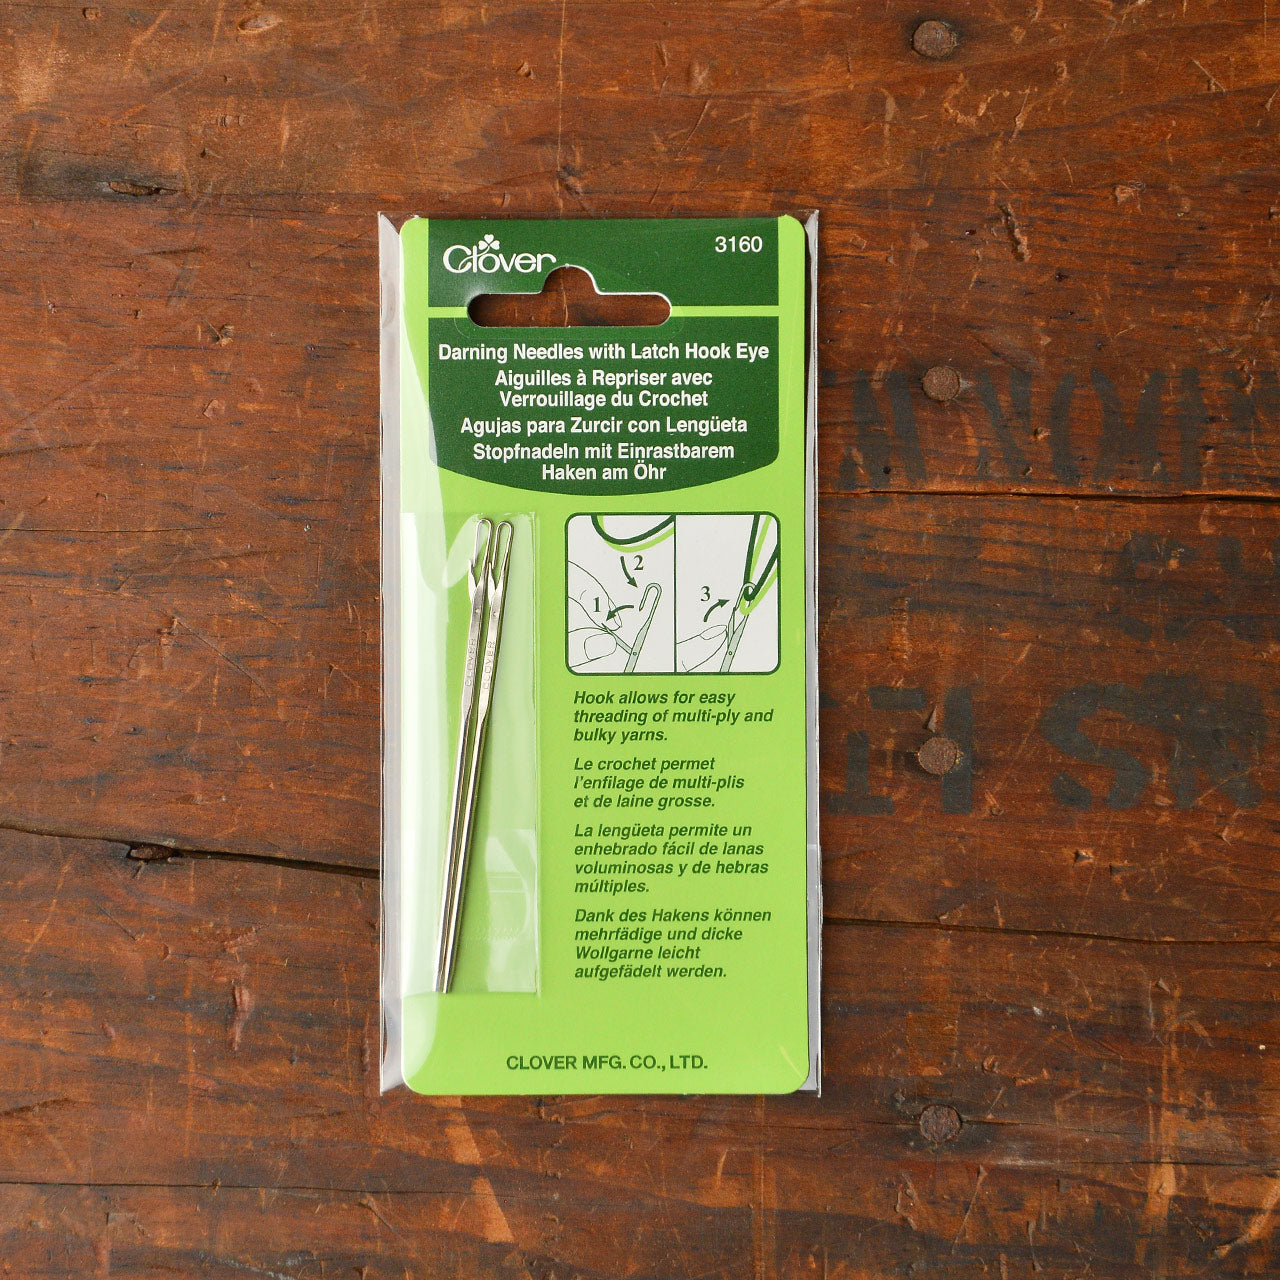 Clover Darning Needle with Latch Hook Eye (2 pack)